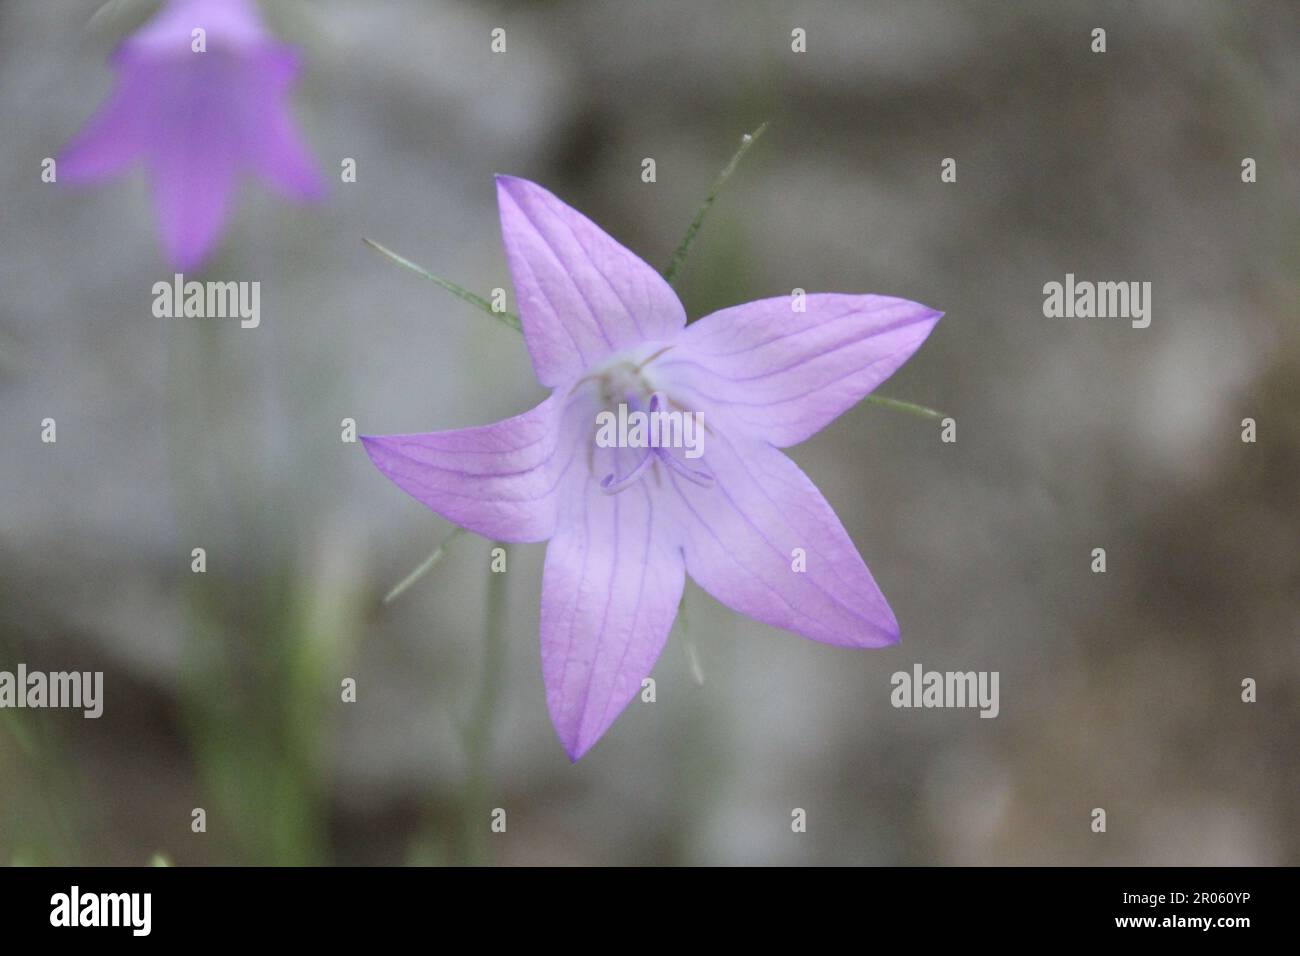 Close up of purple harebell flower, looking straight into the flower centre, with soft focus background showing greenery and another flower Stock Photo